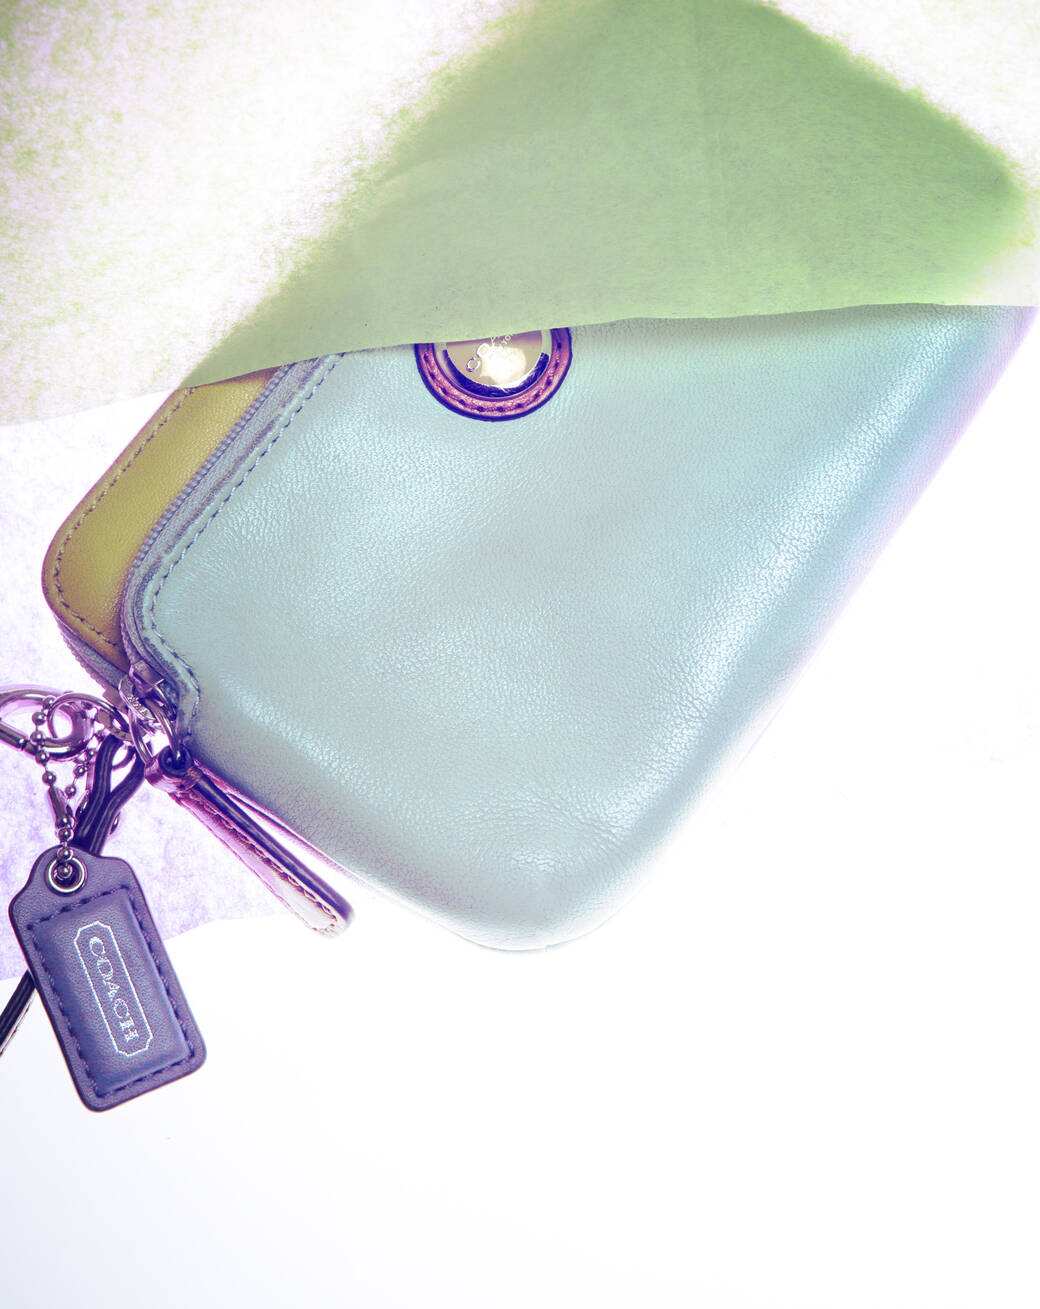 A green and yellow leahter Coach Double Zip Wallet, with purple accents, lying between two translucent sheets of paper.